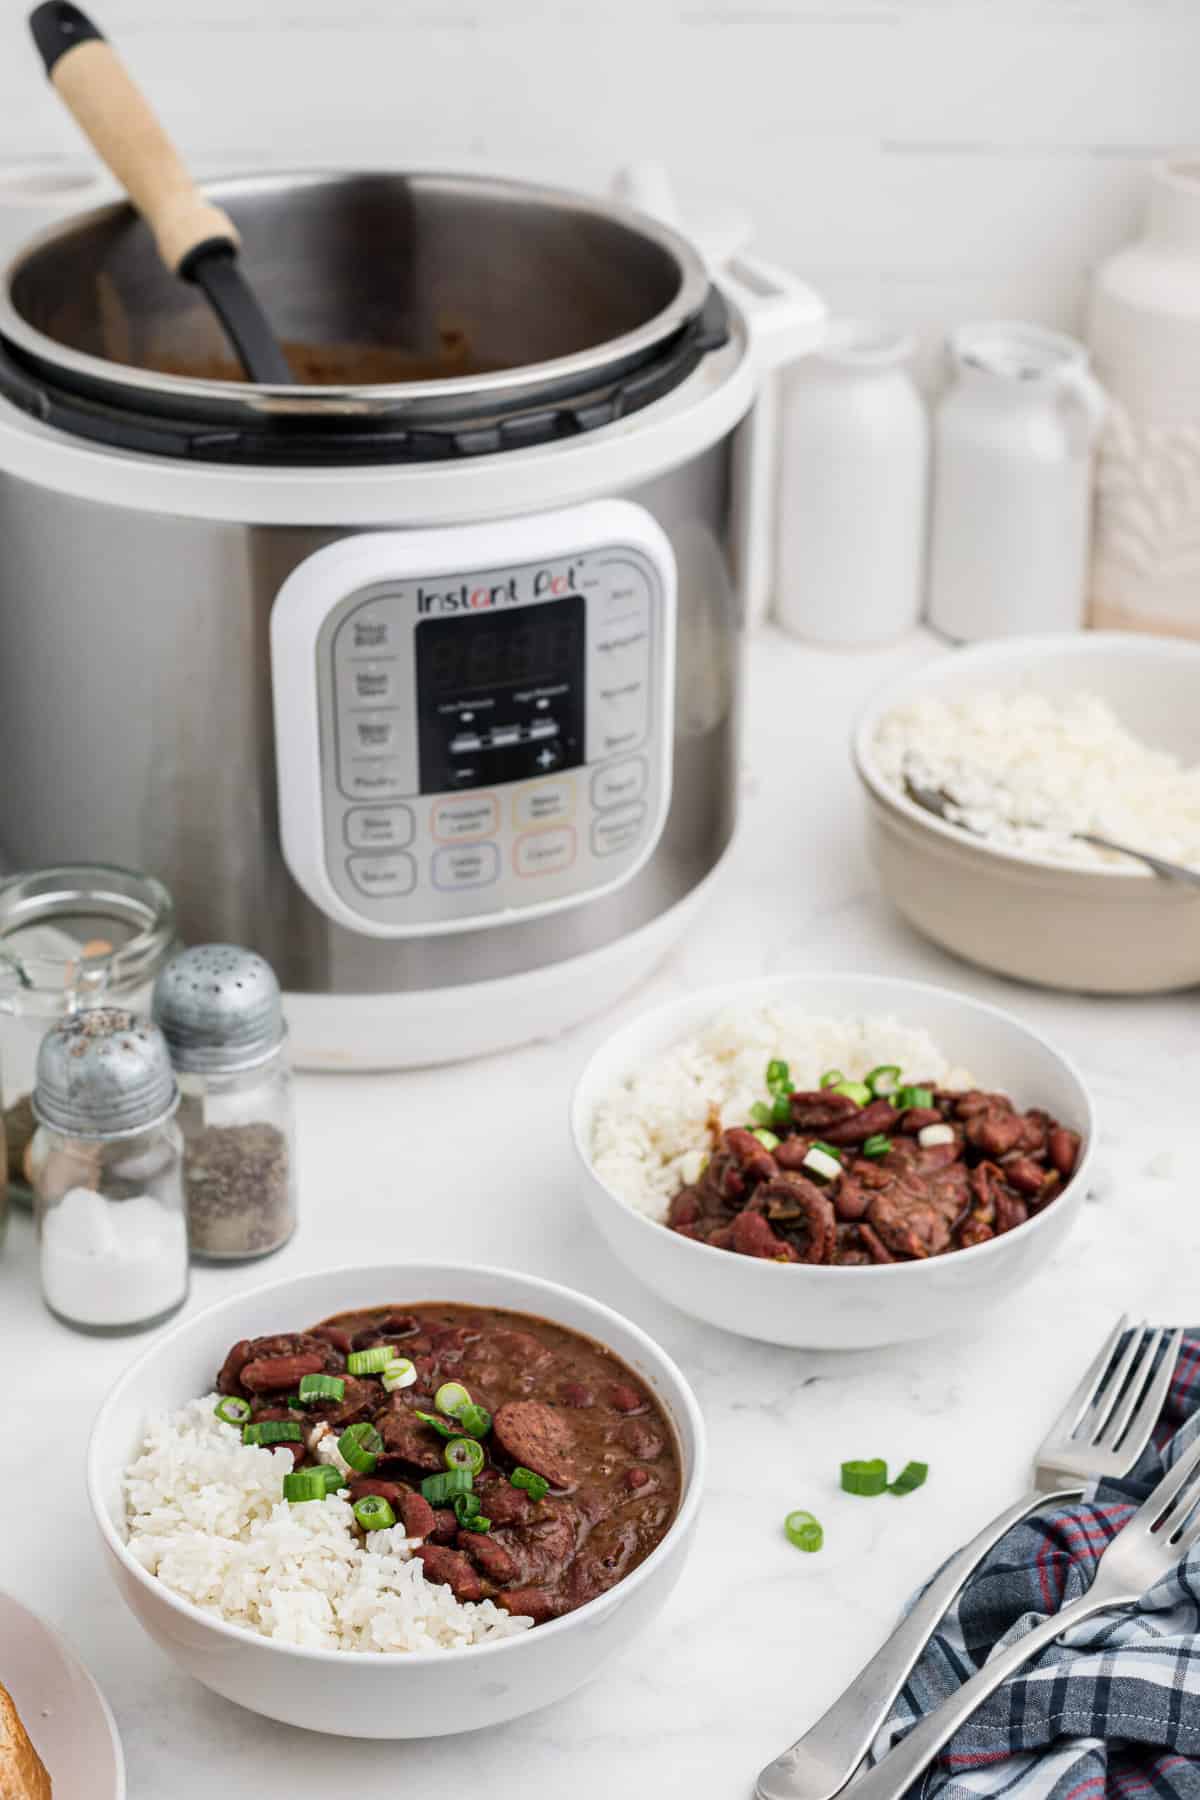 https://thesuburbansoapbox.com/wp-content/uploads/2022/01/Instant-Pot-Red-Beans-and-Rice-4491-scaled.jpg